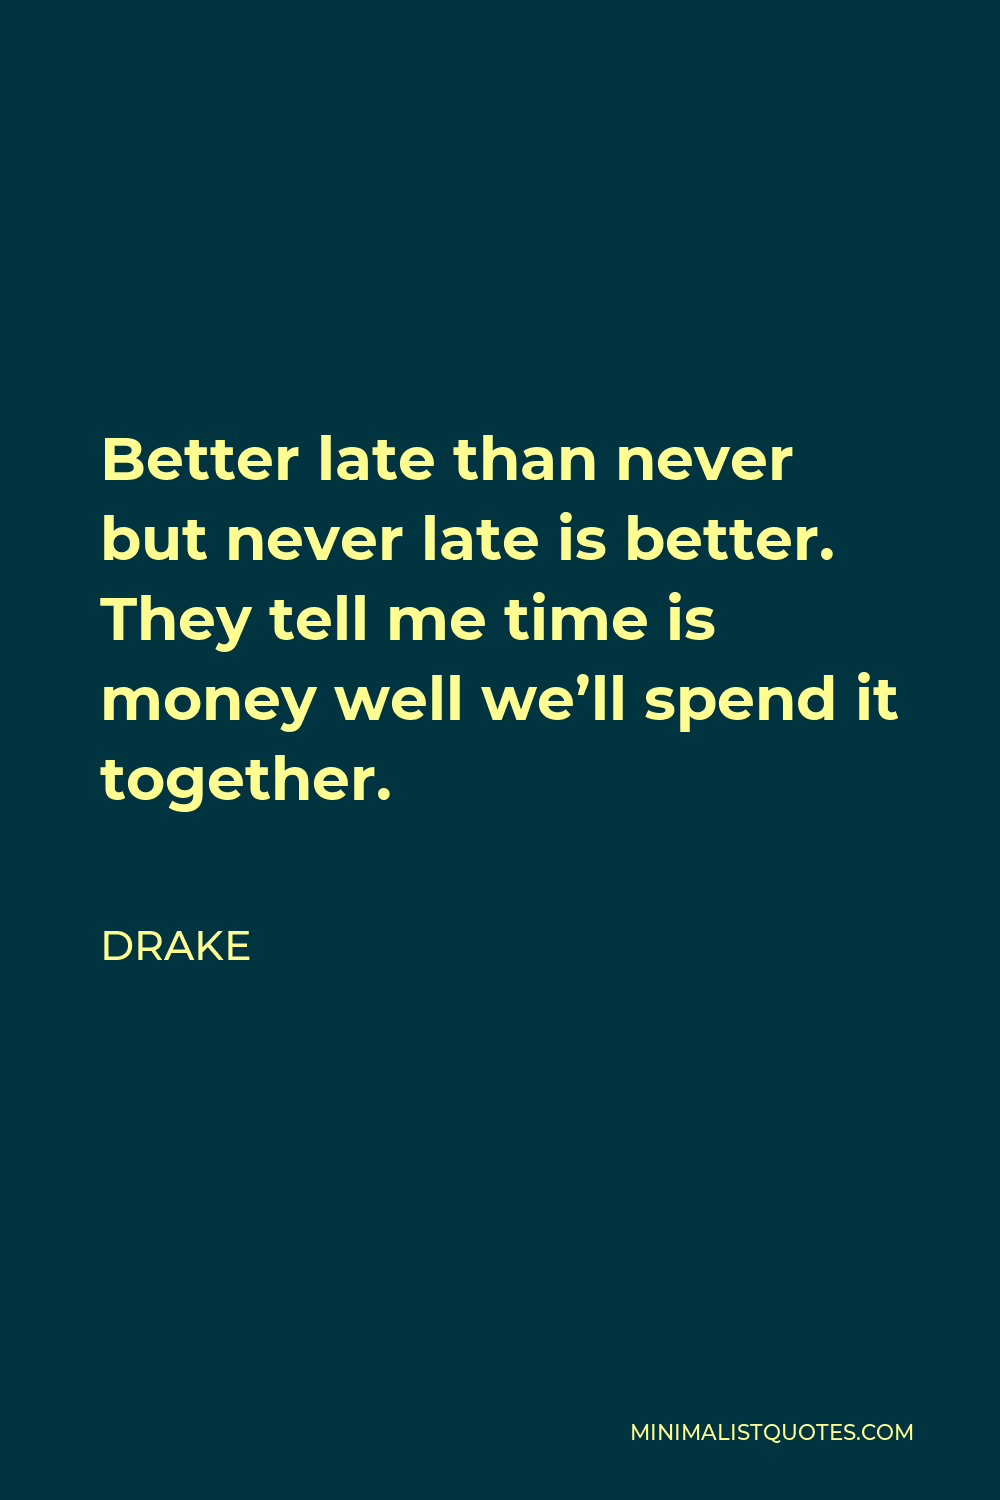 Drake Quote - Better late than never but never late is better. They tell me time is money well we’ll spend it together.